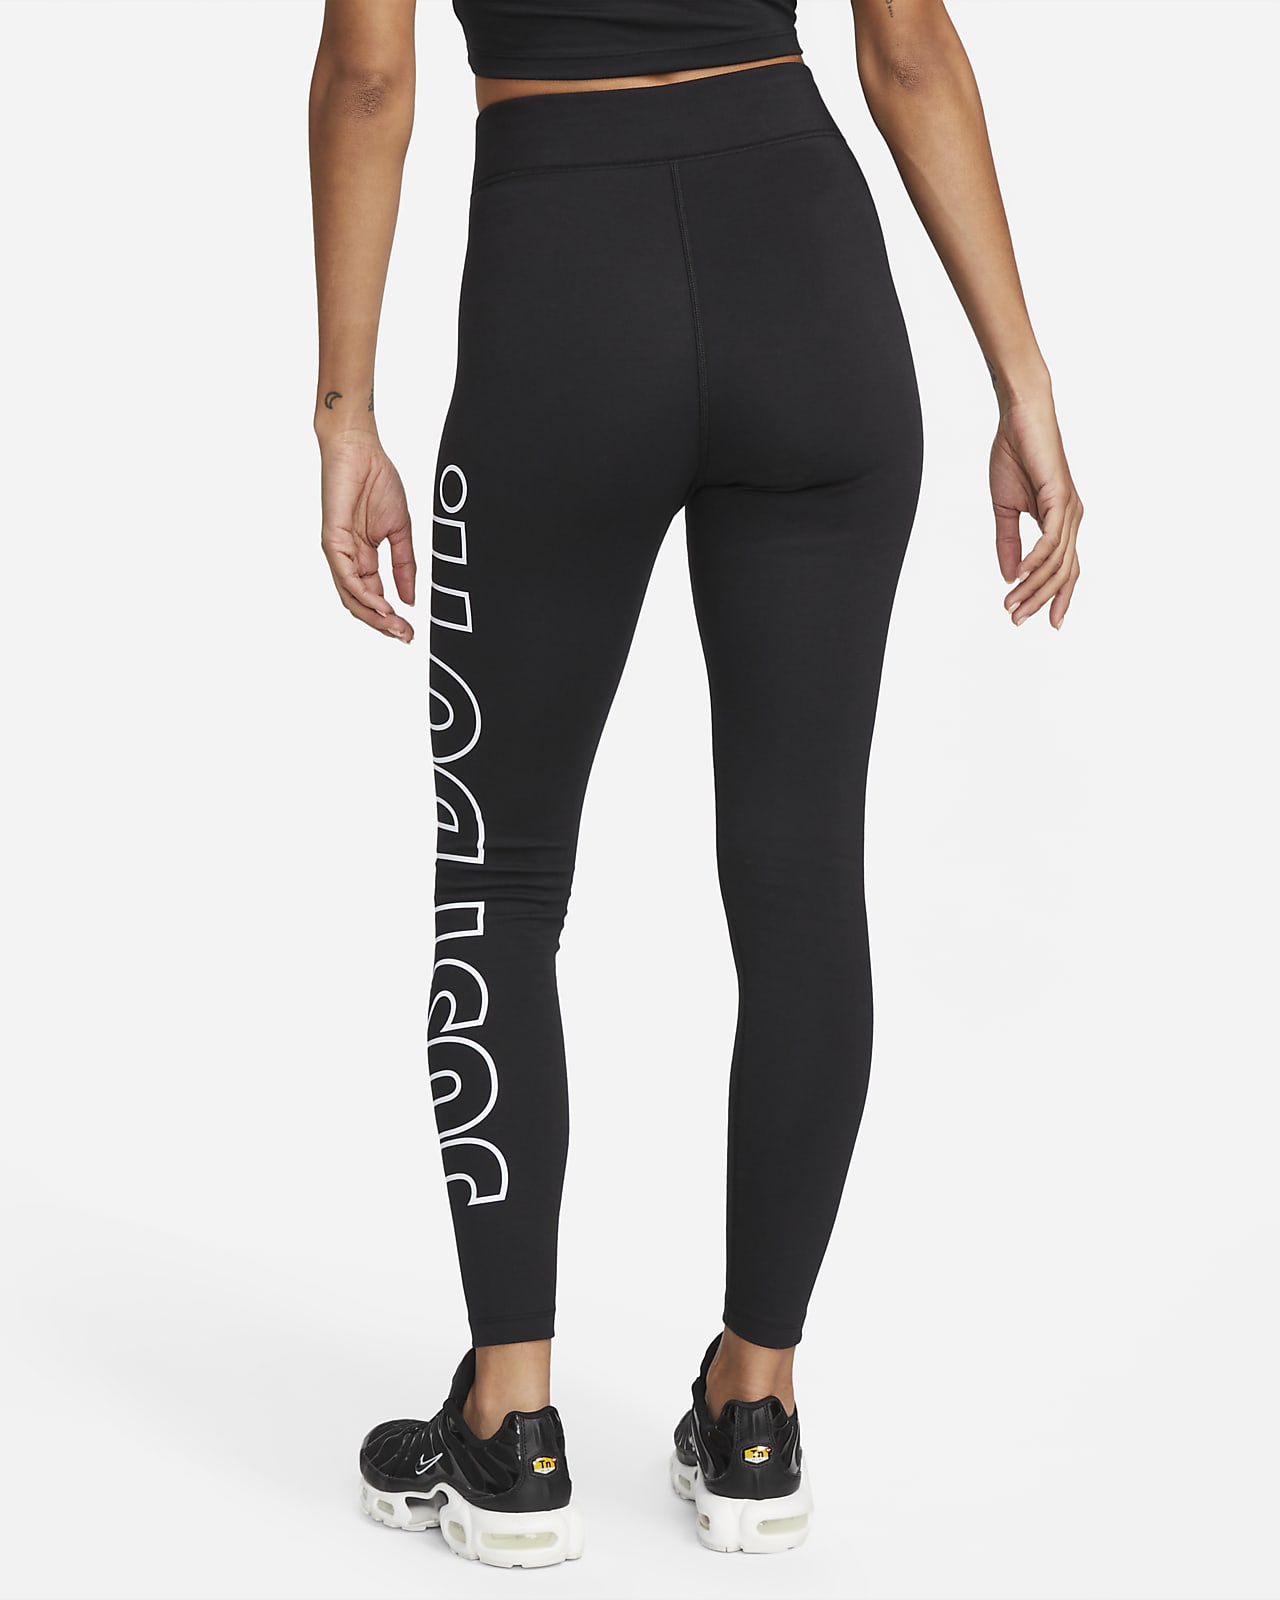 New With Tag nike leggings women Tight Fit Black Size L Or XL MSRP $55